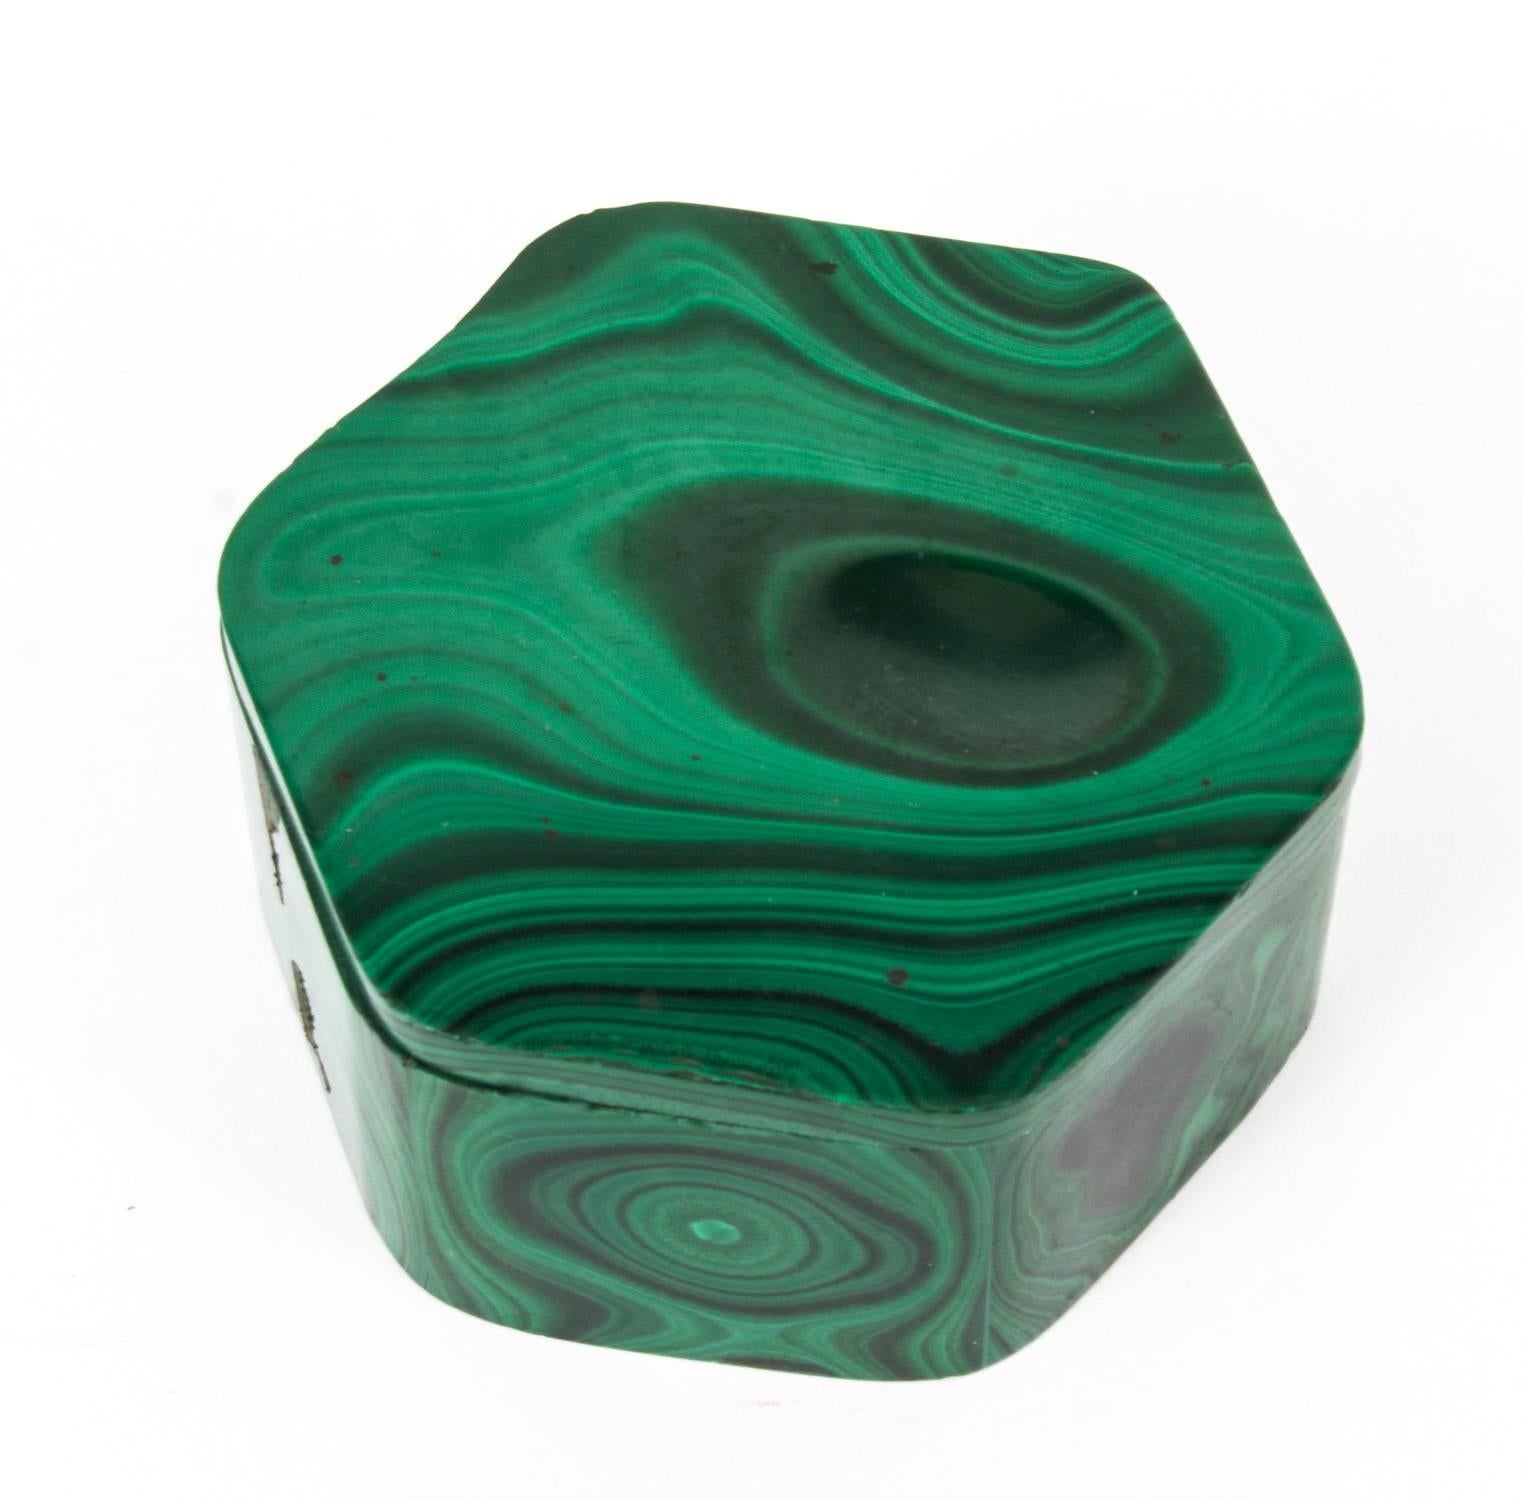 This is a superb quality antique hexagonal solid malachite box and cover casket dating from, circa 1880.
Made from solid malachite and in really superb condition.

Provenance:
The collection of the late Ronnie Kirkwood and George